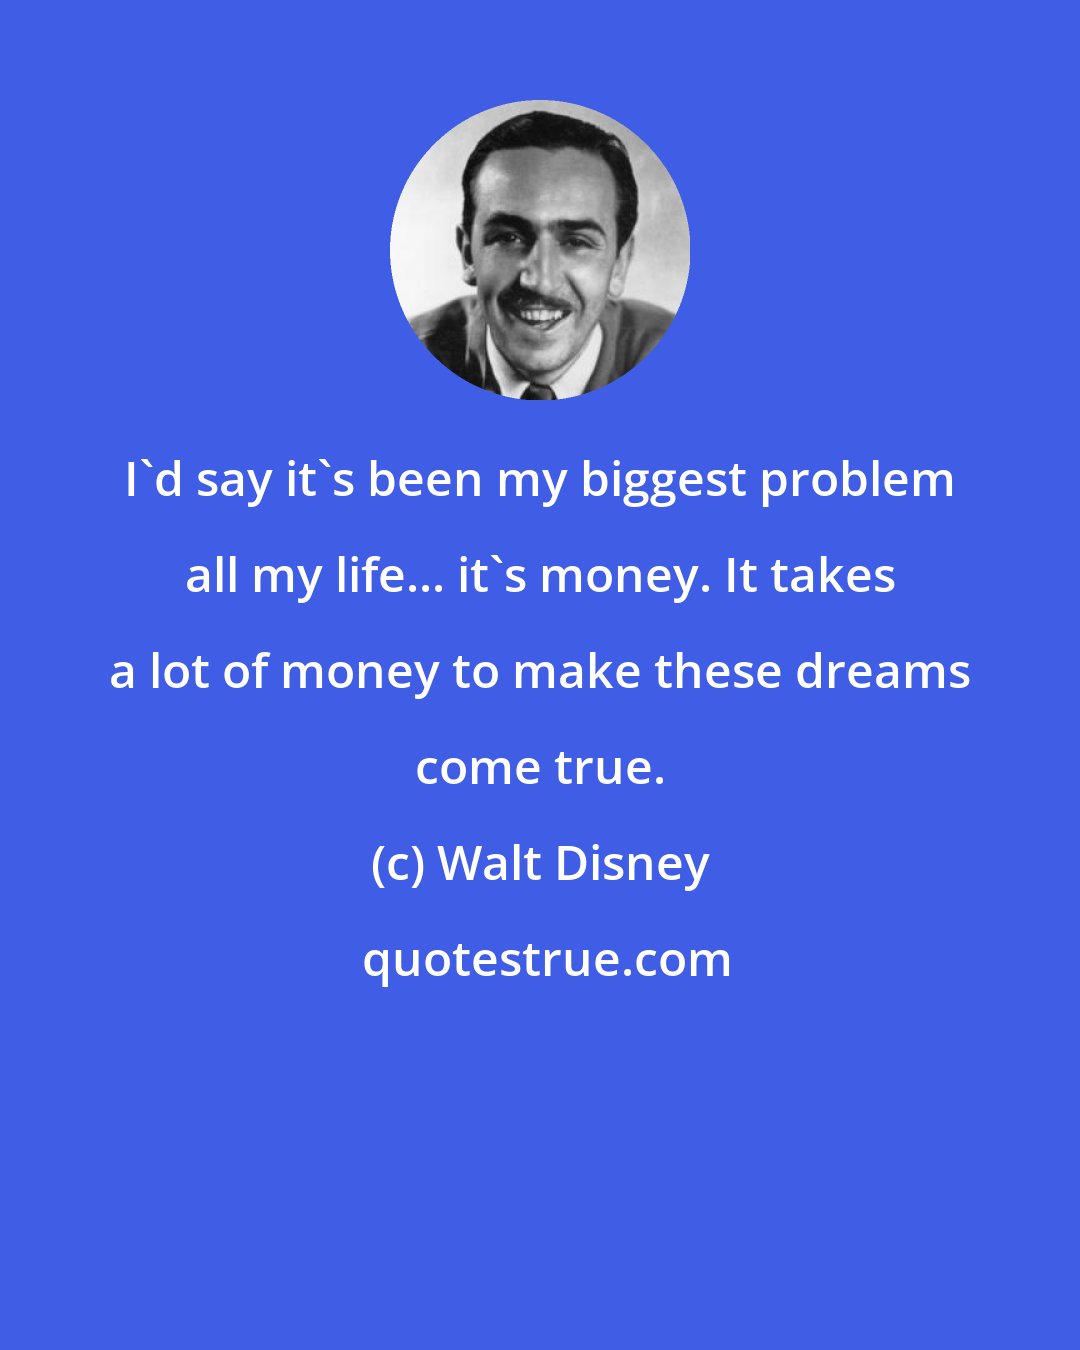 Walt Disney: I'd say it's been my biggest problem all my life... it's money. It takes a lot of money to make these dreams come true.